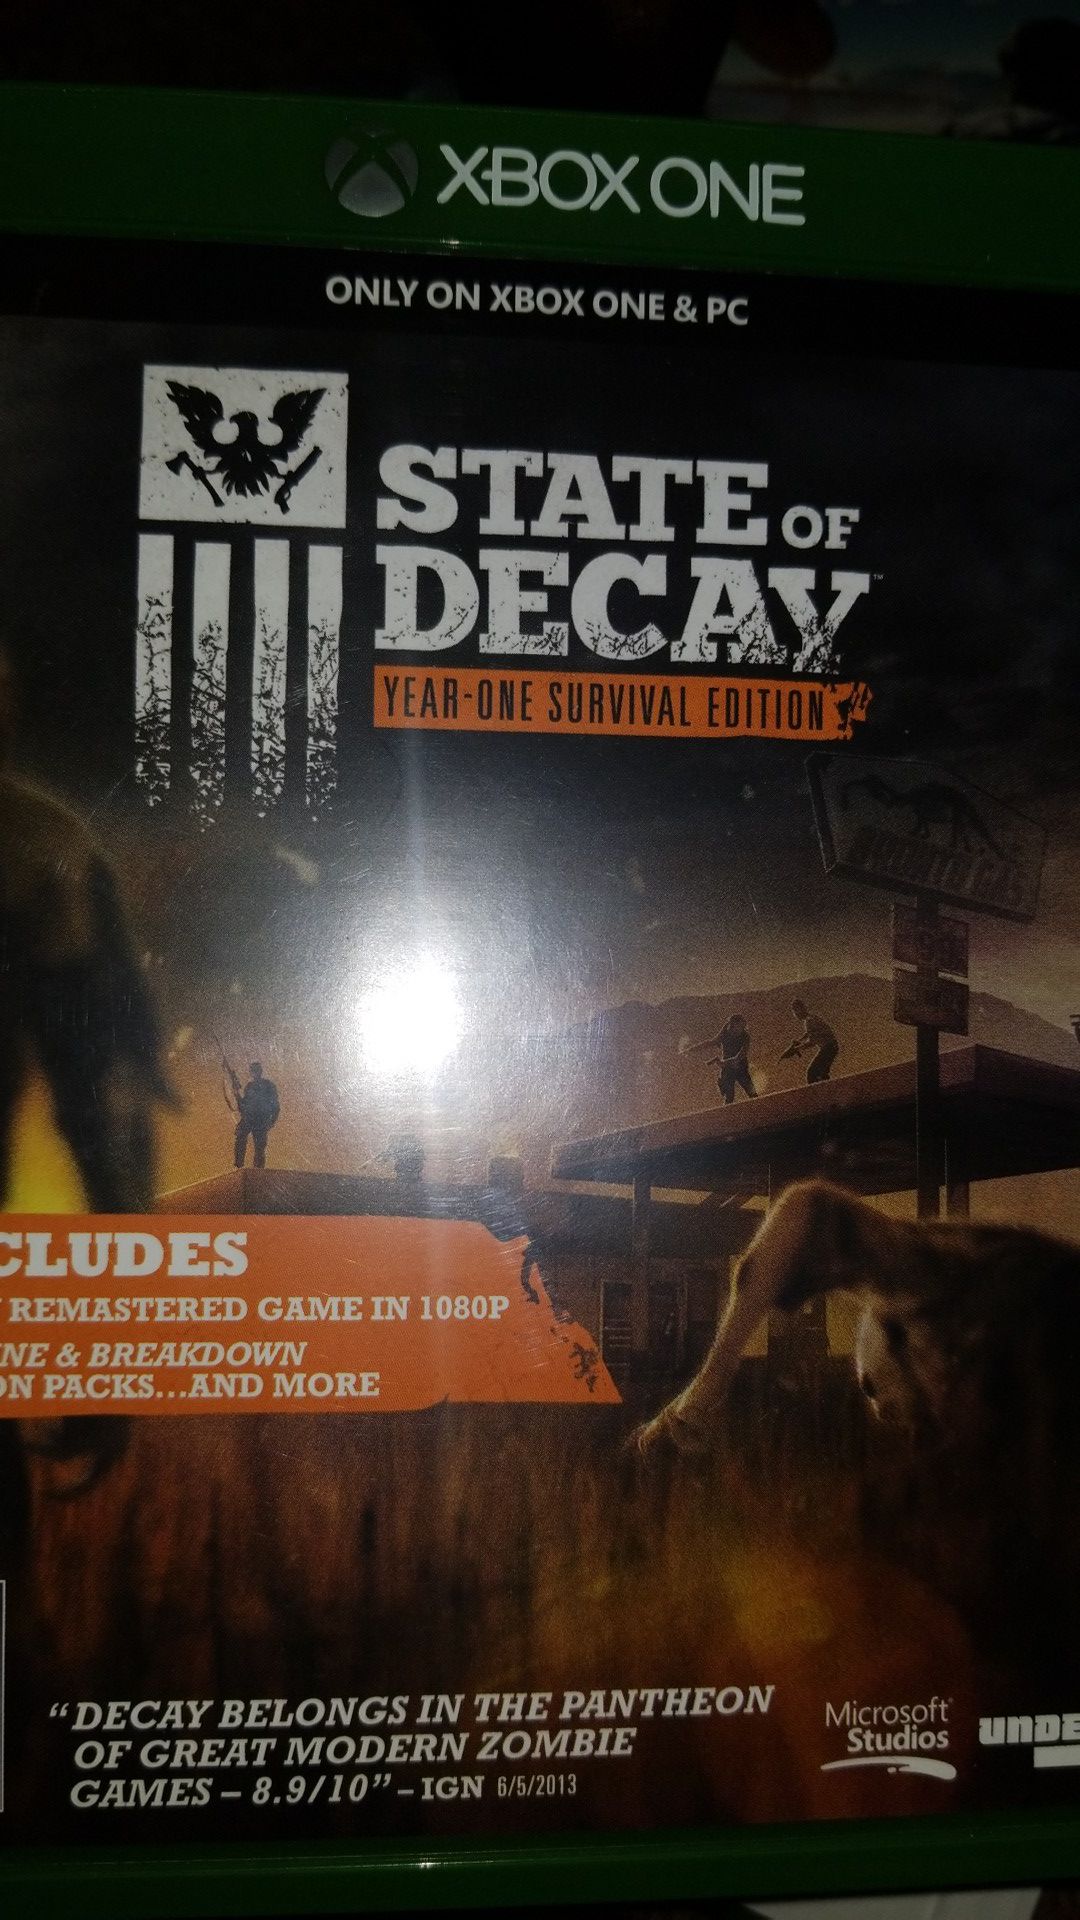 Video game---state of decay